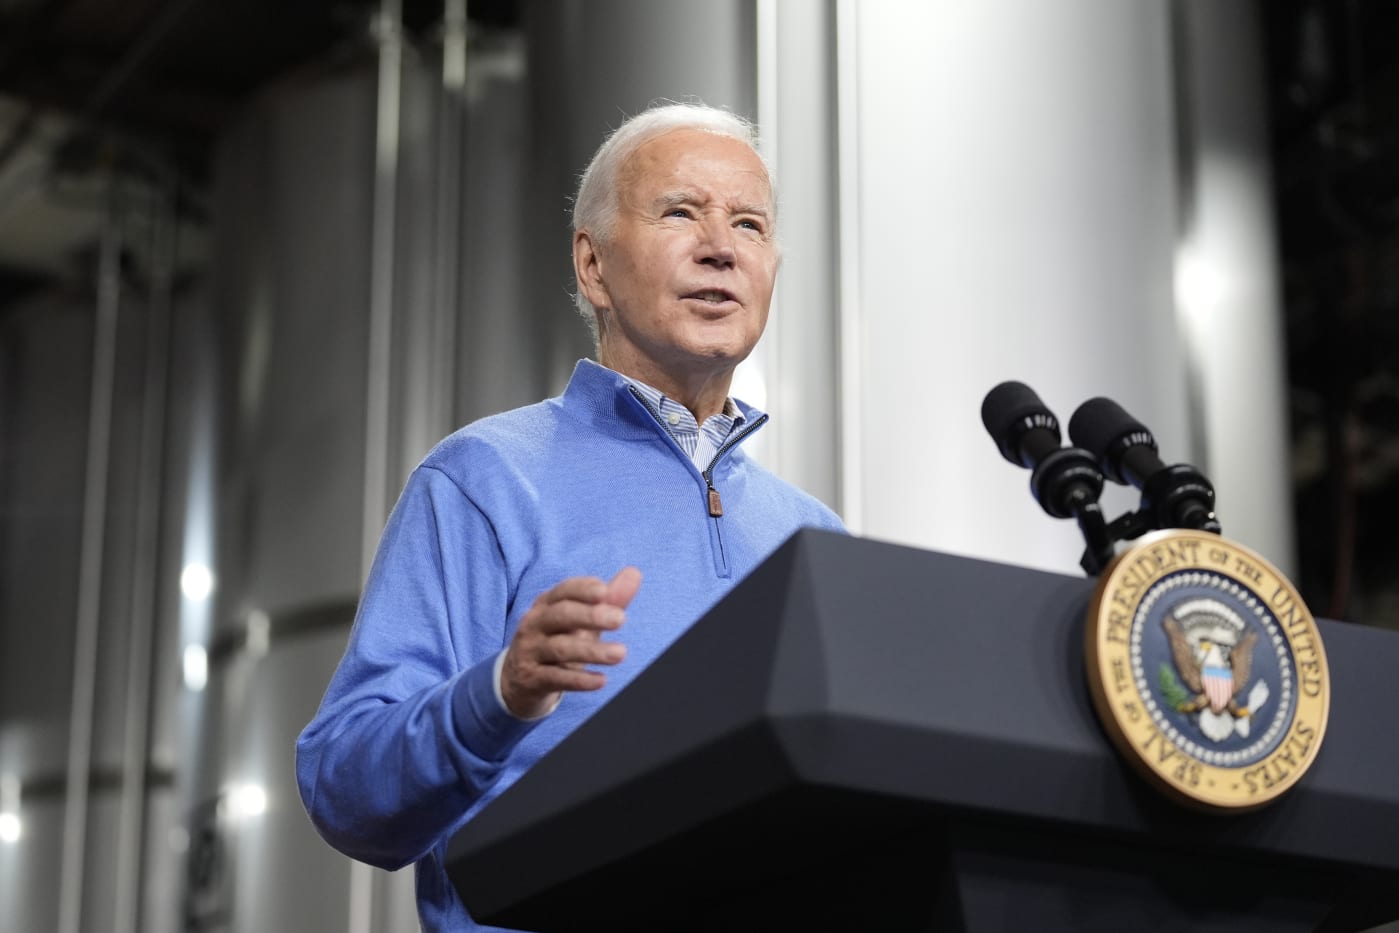 ElevenLabs reportedly banned the account that deepfaked Biden's voice with its AI tools